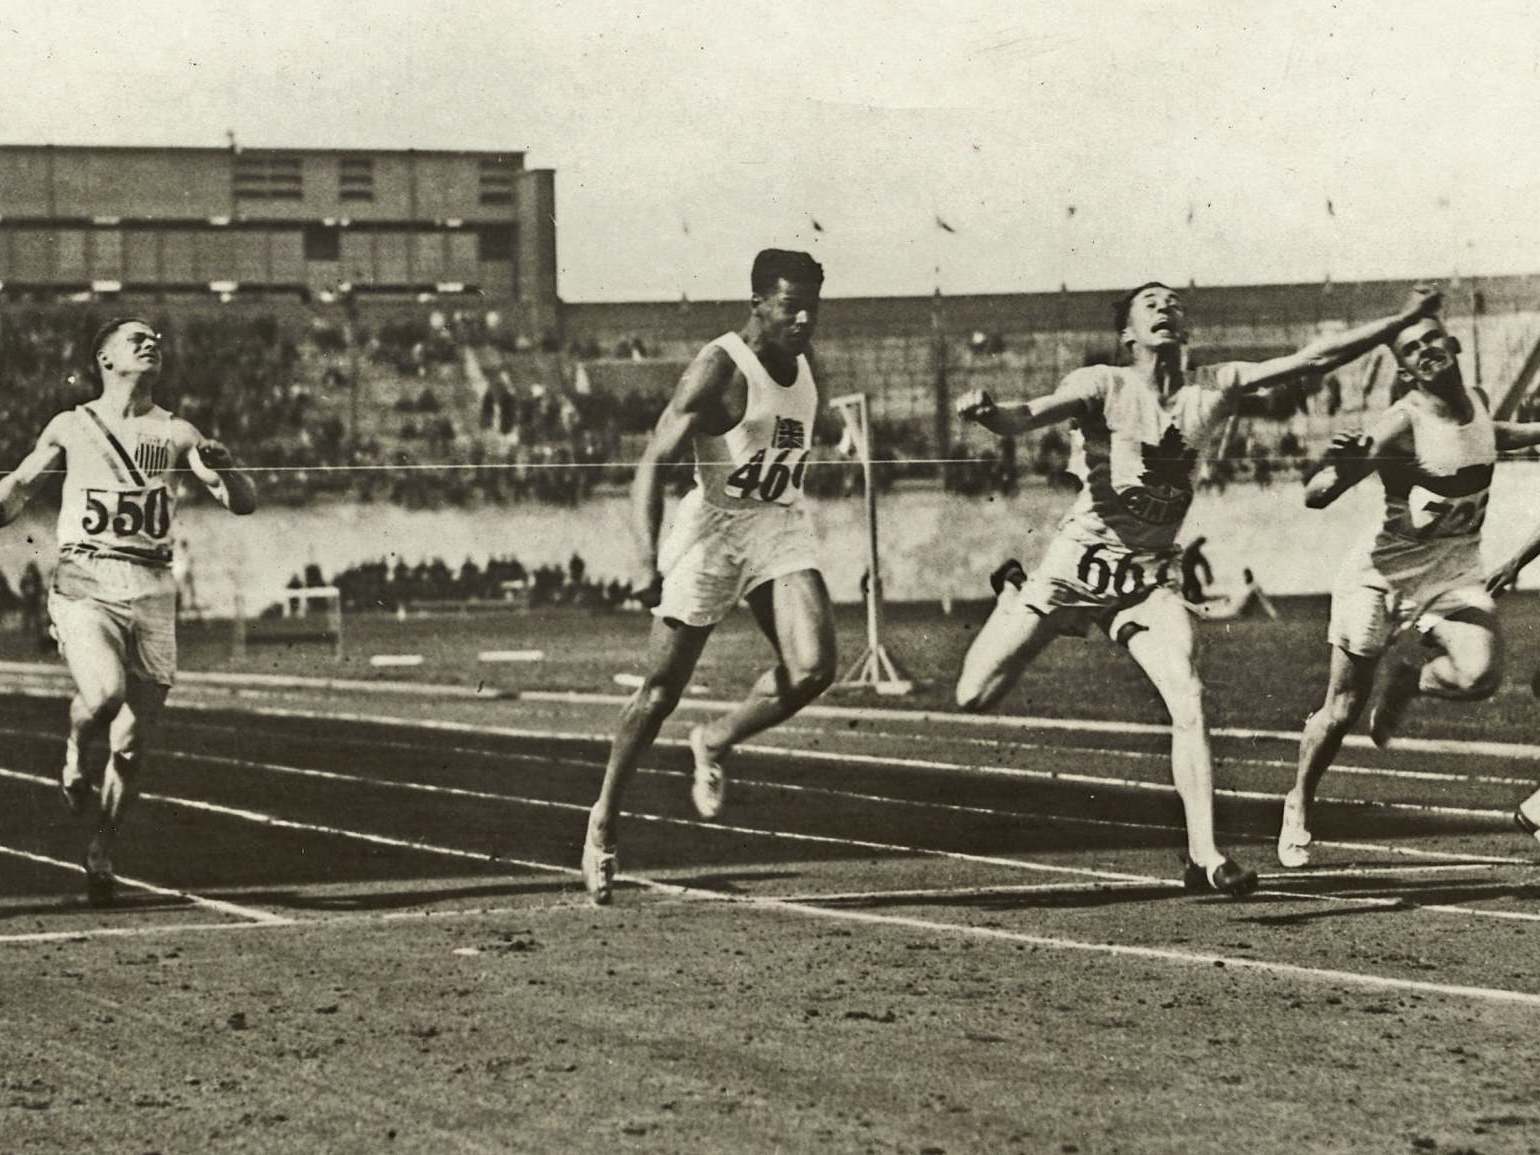 London (second from left) in the 100m at the 1928 Amsterdam Olympics